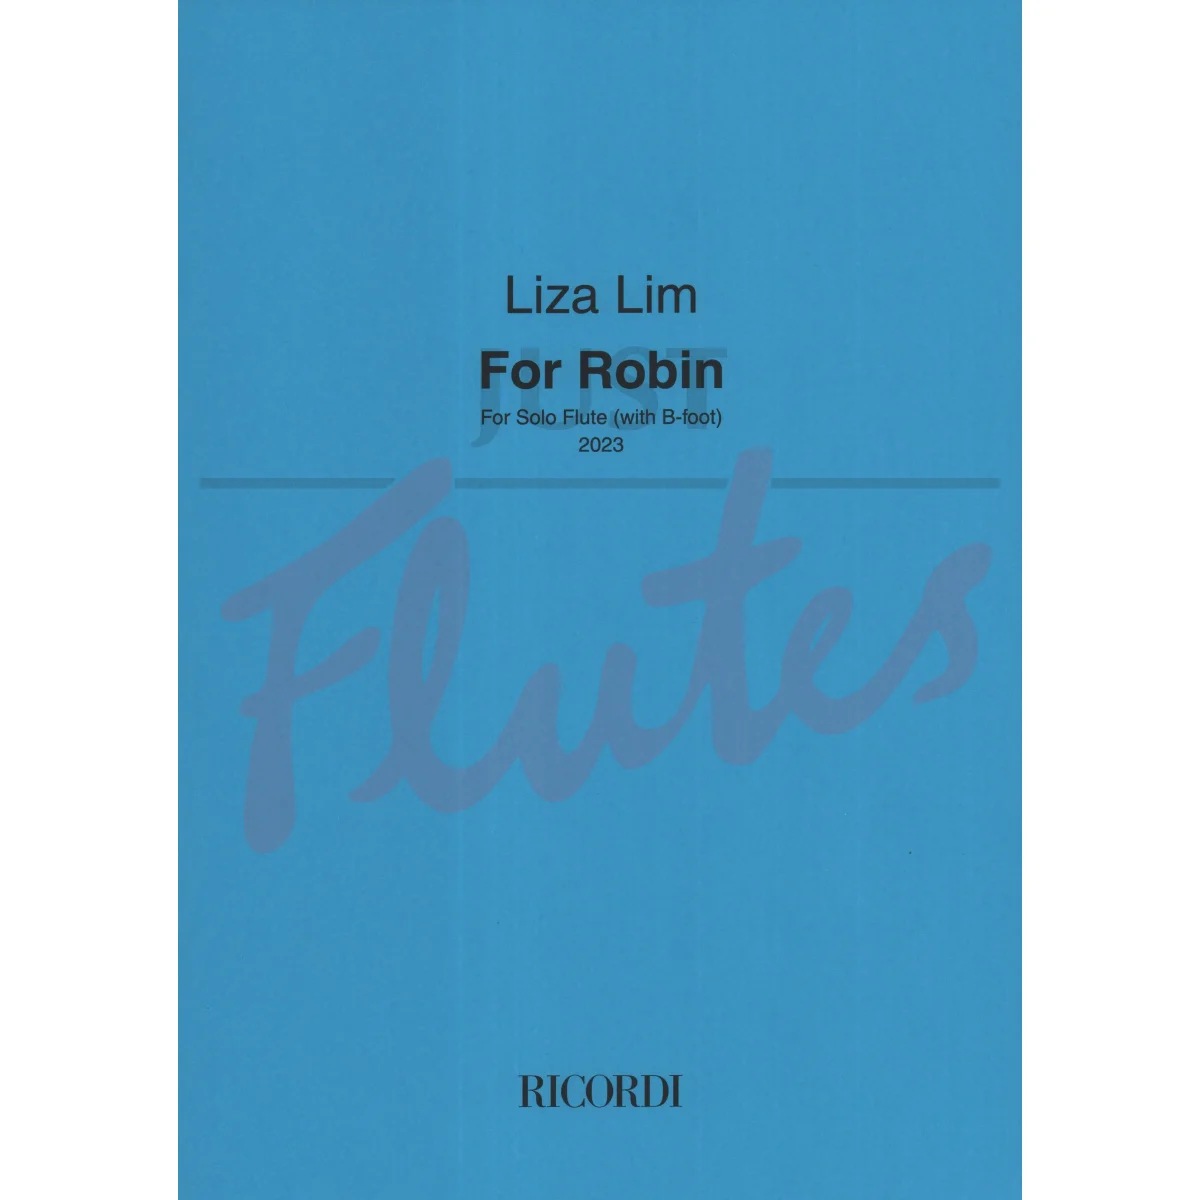 For Robin for Solo Flute (with B-foot)